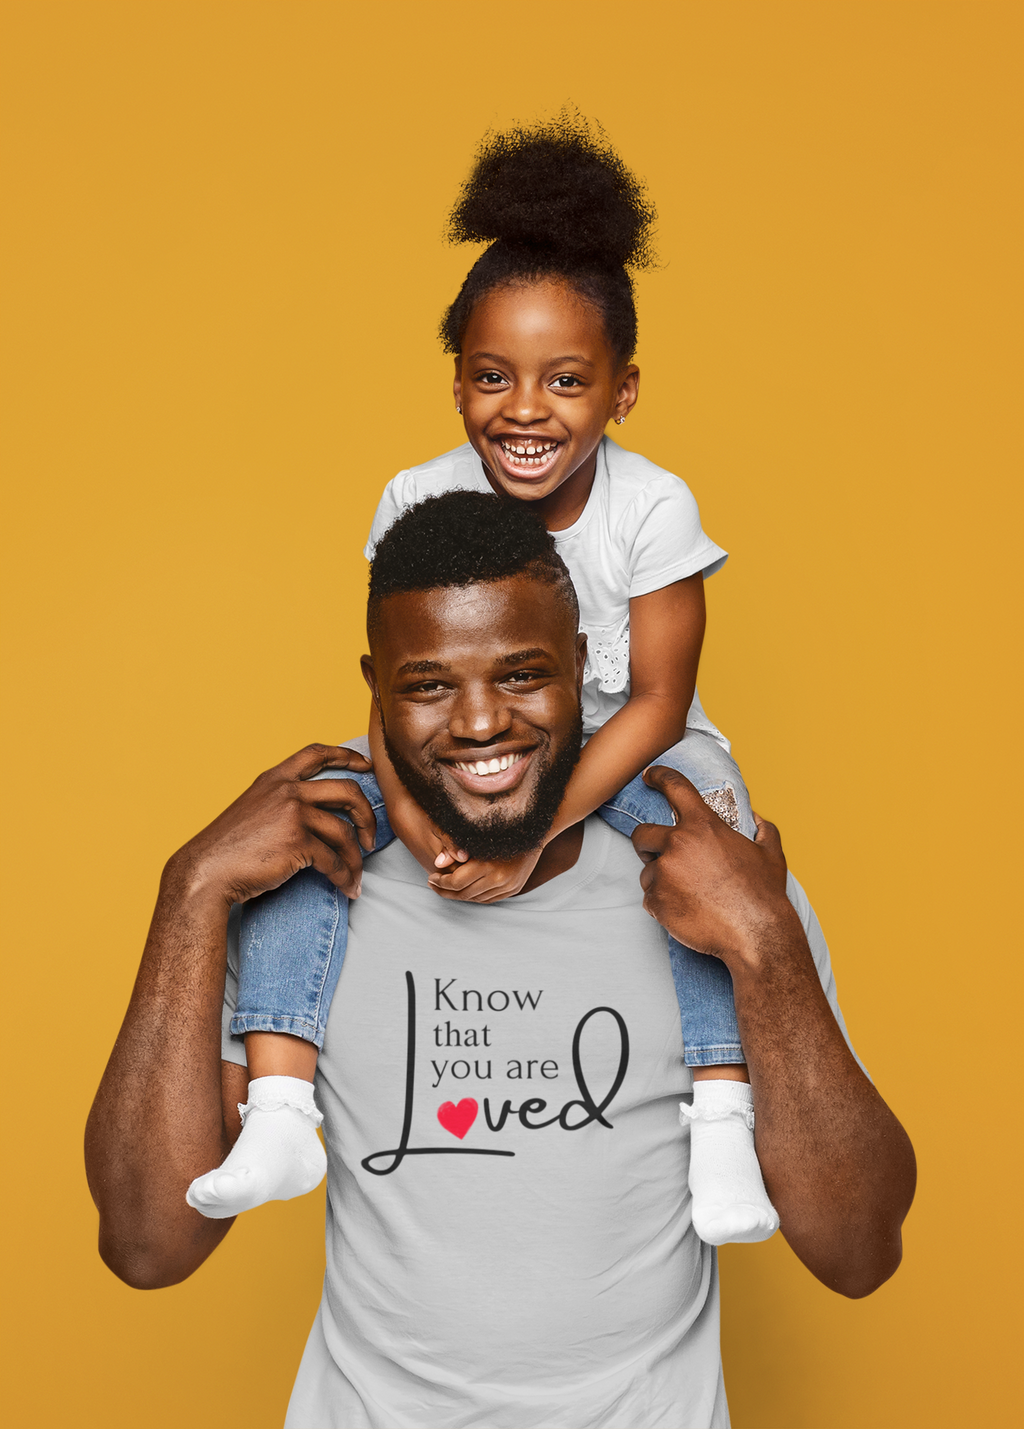 Know that you are loved - Short sleeve t-shirt